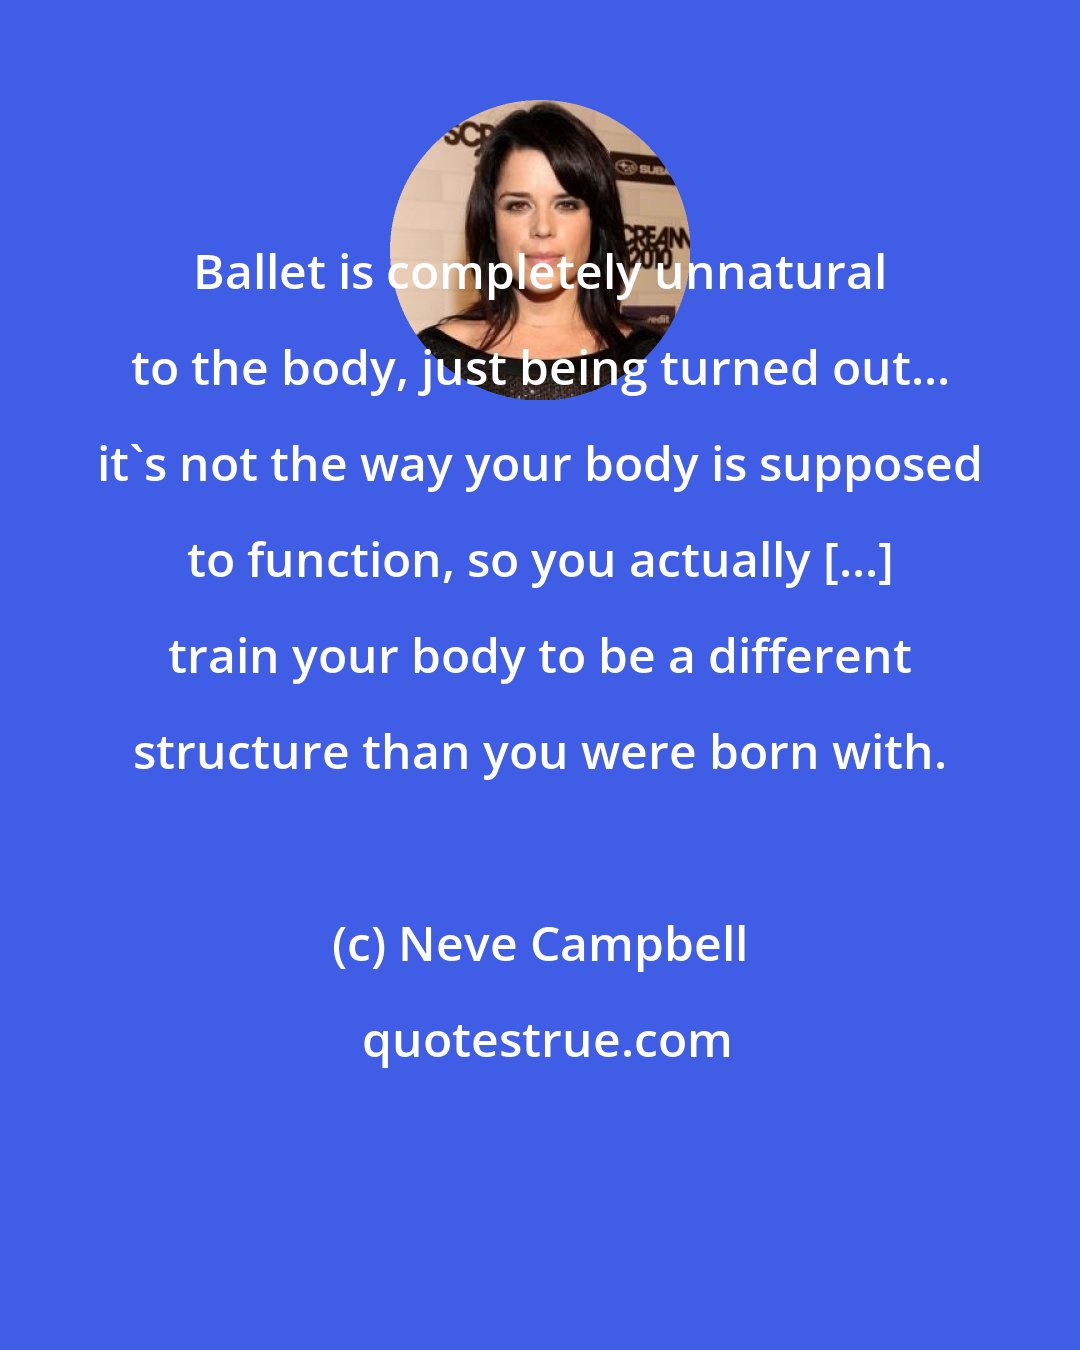 Neve Campbell: Ballet is completely unnatural to the body, just being turned out... it's not the way your body is supposed to function, so you actually [...] train your body to be a different structure than you were born with.